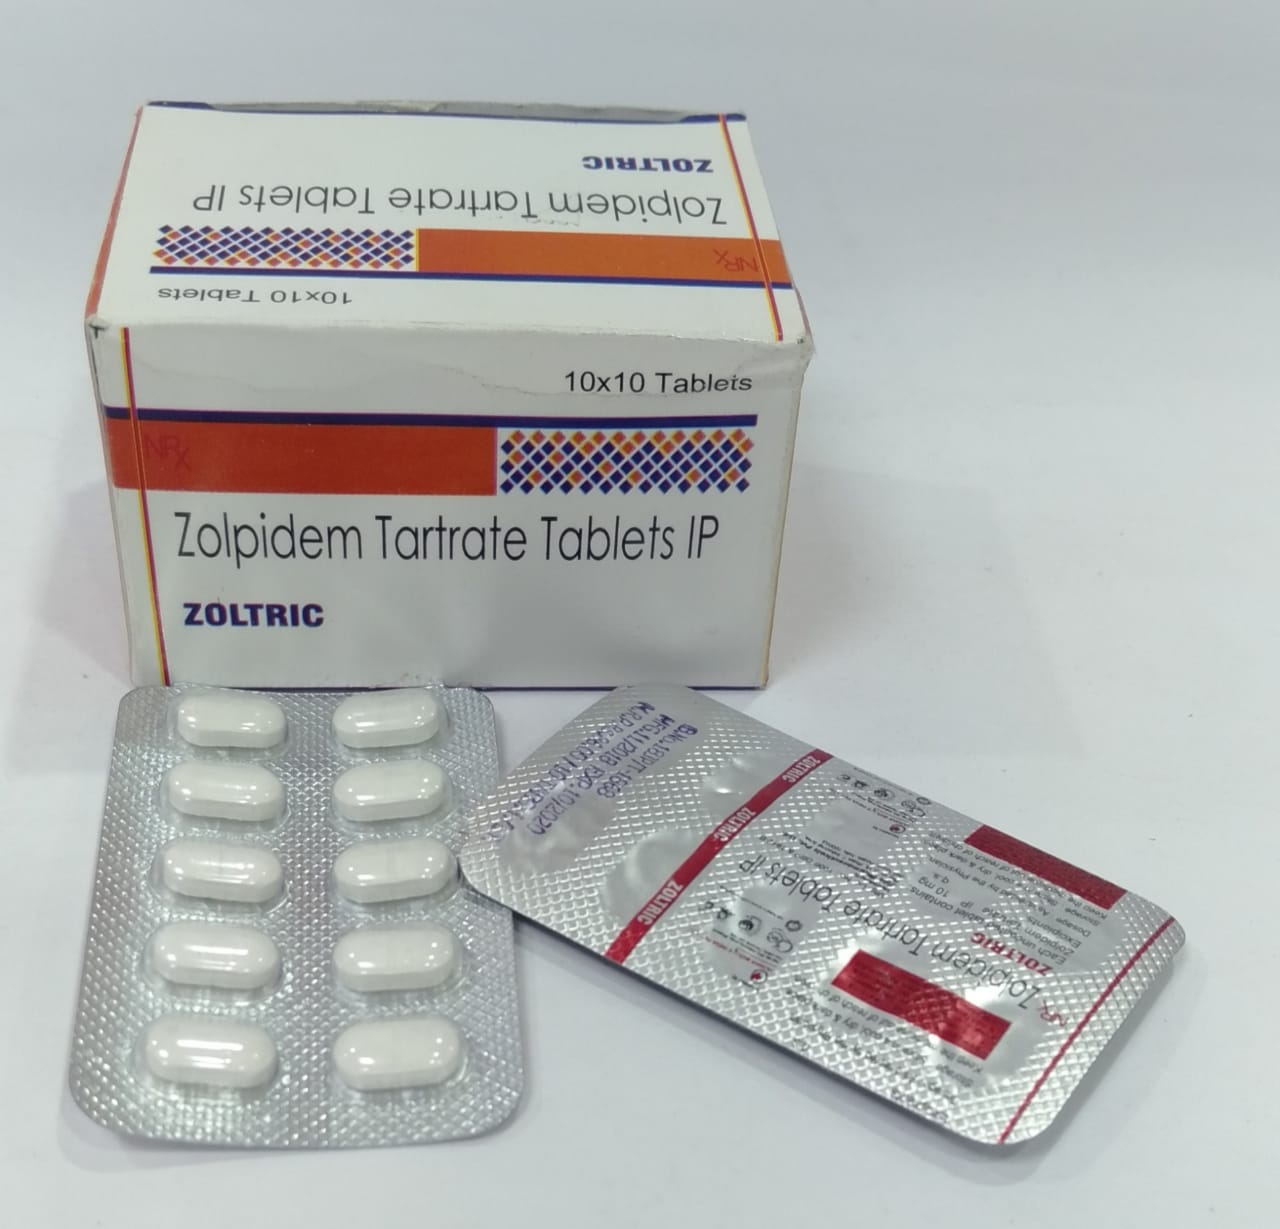 ZOLTRIC TABLETS